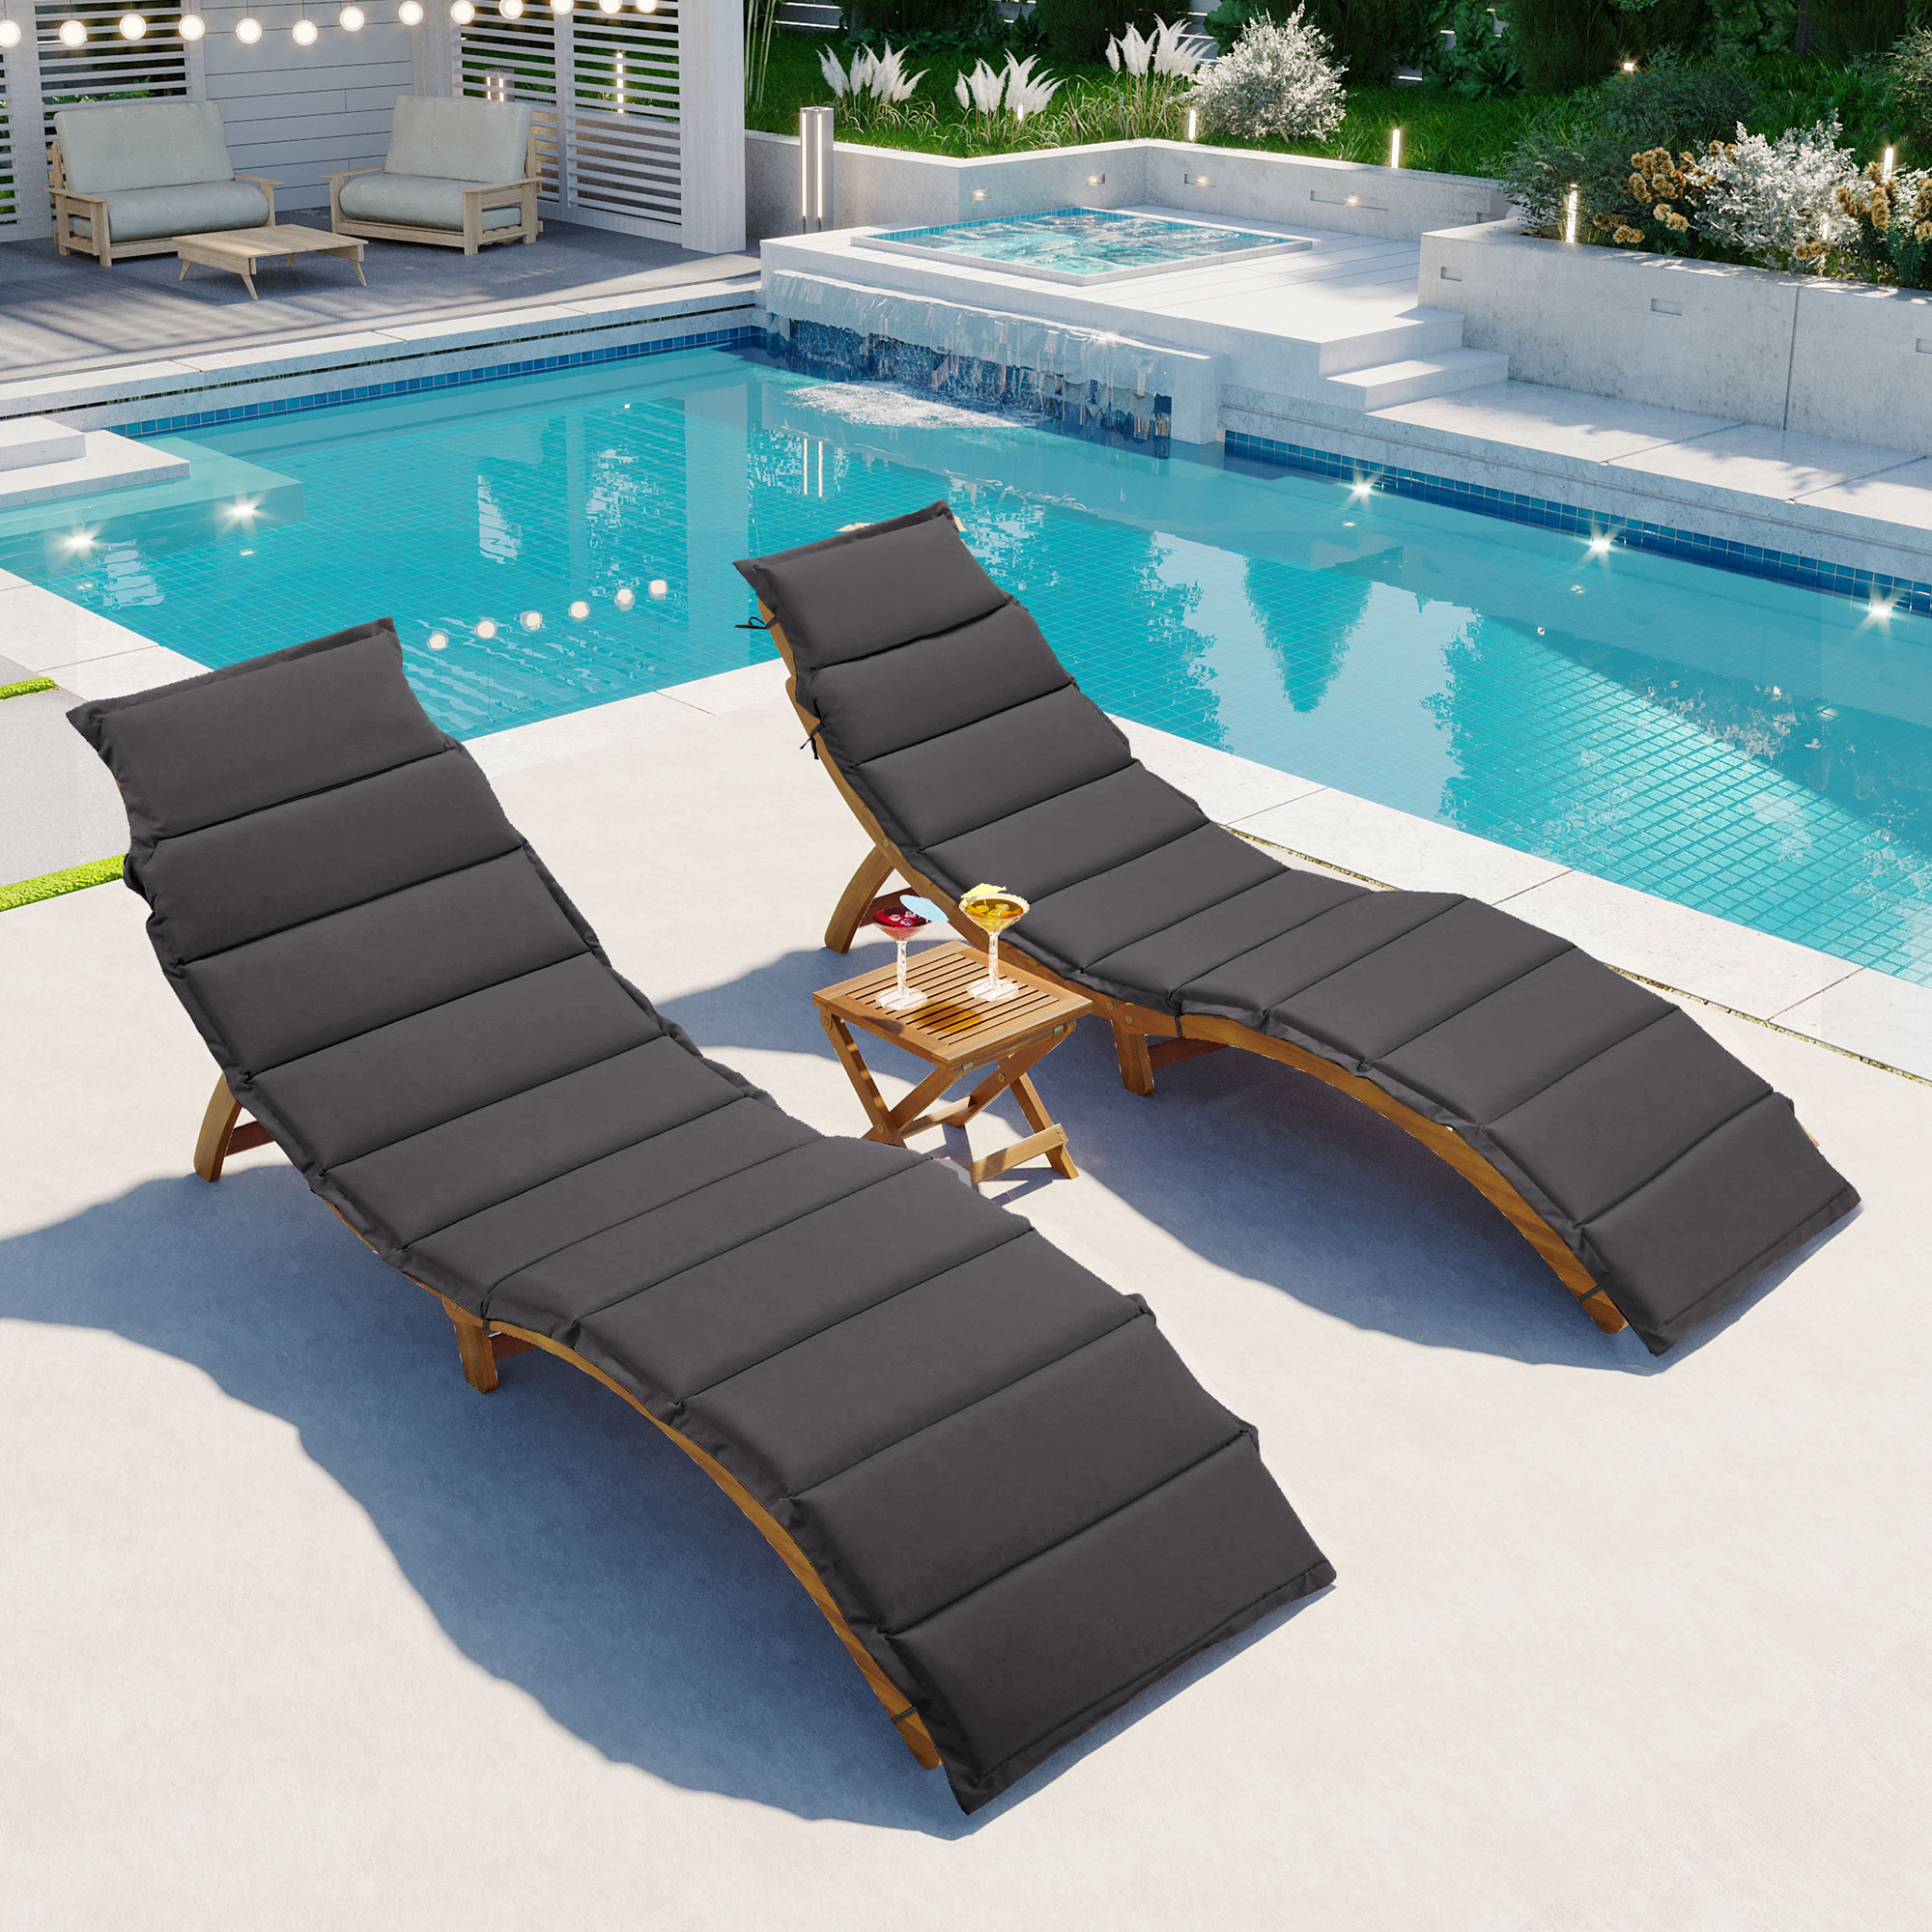 Wooden Patio Lounge Chairs, 3 Pieces S-shape Outdoor Chaise Lounge with Tea Table and Soft Cushions, Reclining Pool Beach Deck Backyard Porch Chair - image 1 of 11